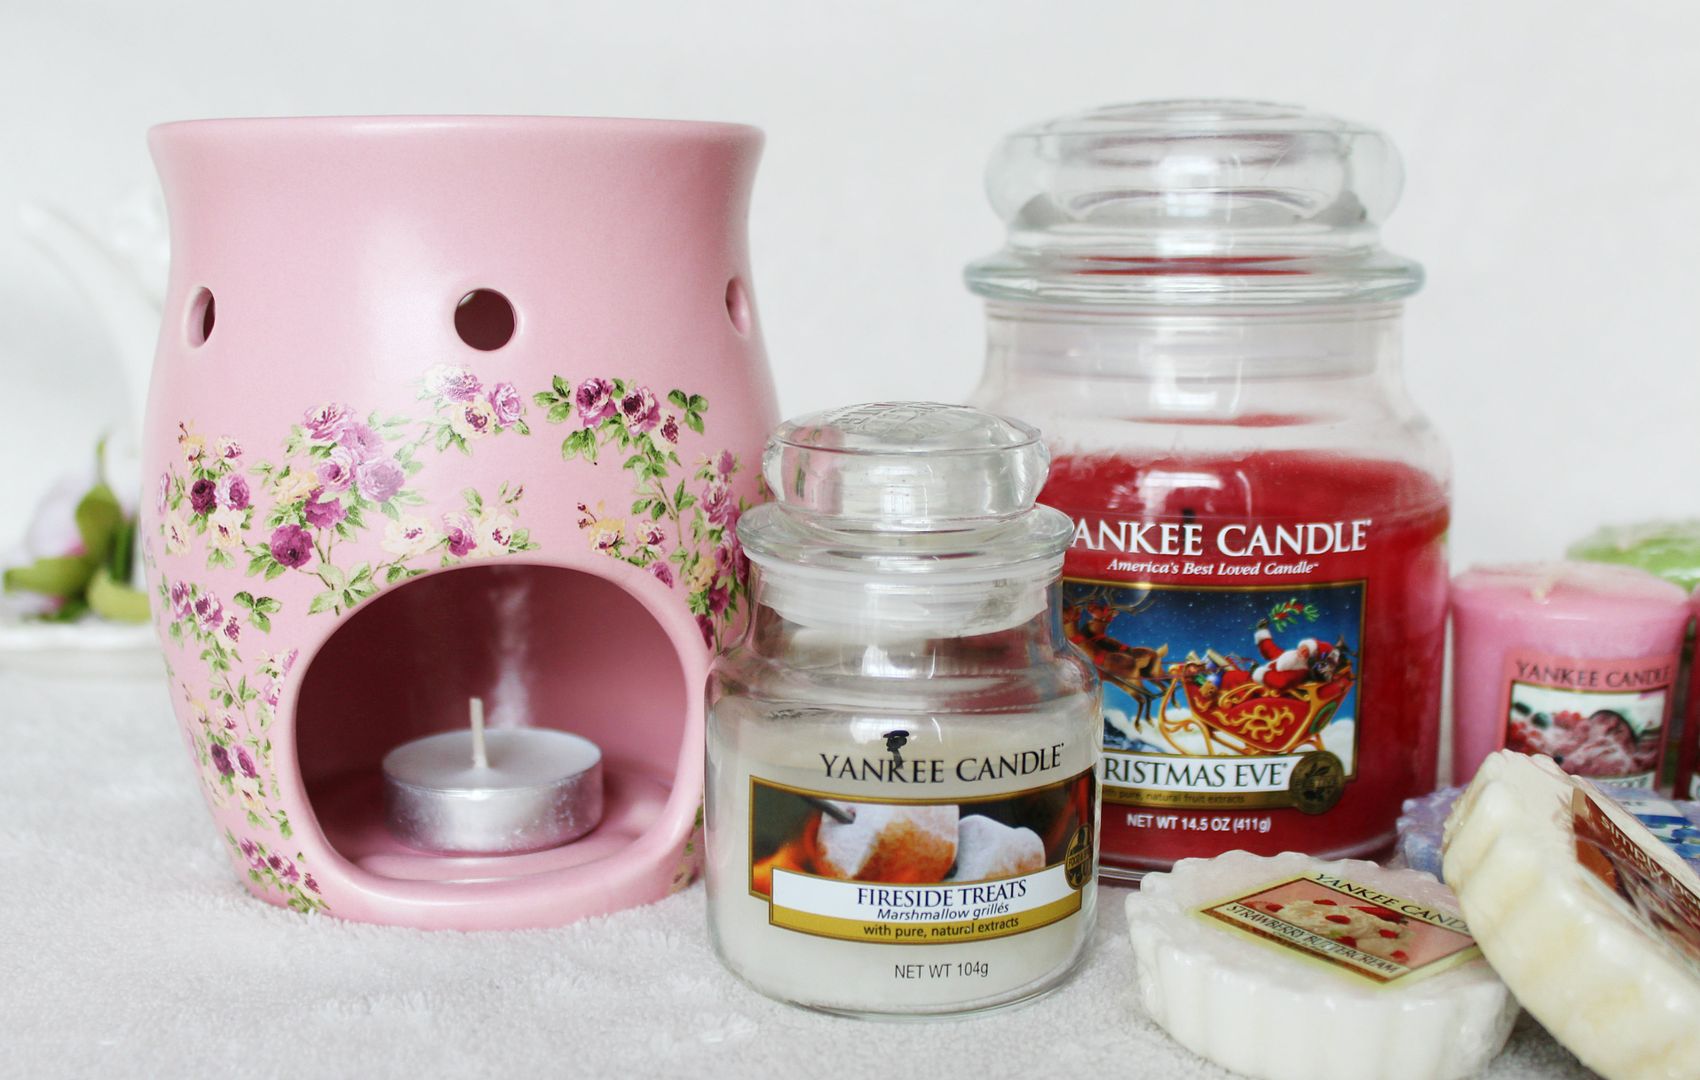 Yankee-Candle-Collection-Jar-Votive-Samplers-Wax-Melts-Tarts-Christmas-Wiinter-Scents-Christmas-Eve-Fire-Side-Treats-Vintage-Floral-Wax-Burner-Belle-Amie-UK-Beauty-Fashion-Lifestyle-Blog